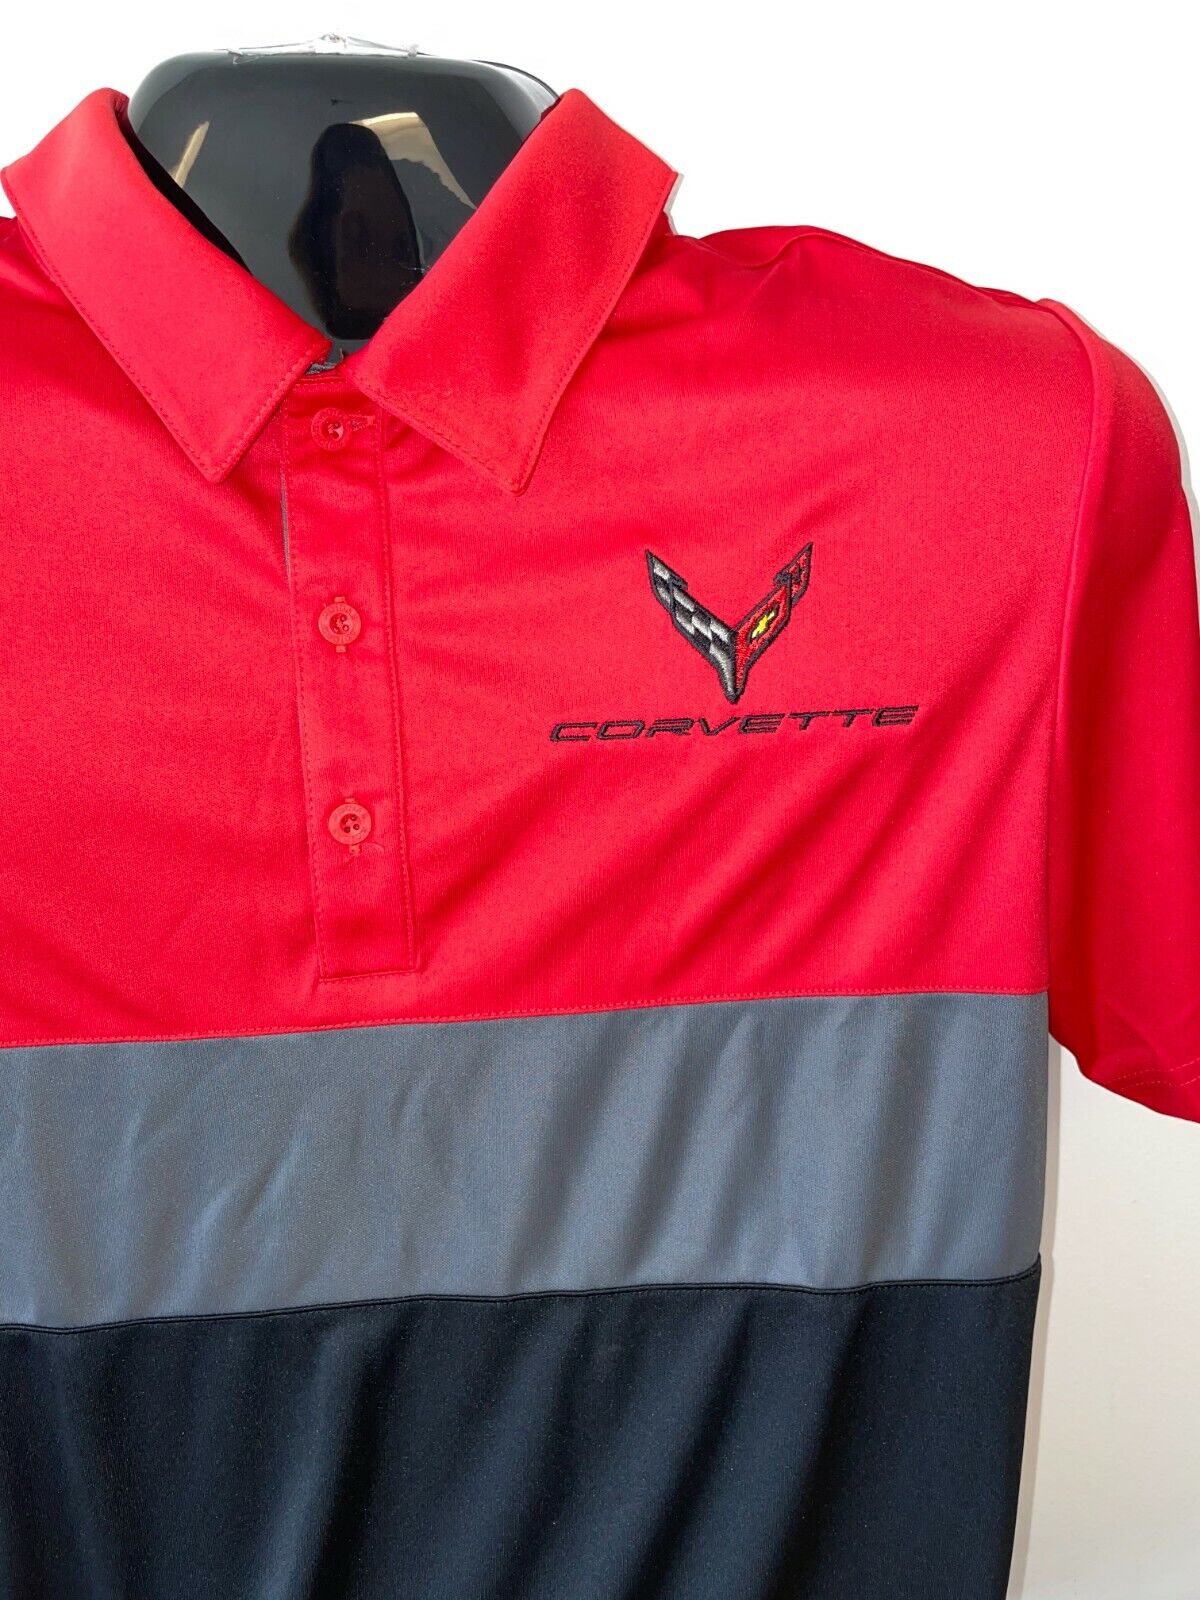 Corvette C8 Adidas Sport Polo T-Shirt Red, Black and Gray combined